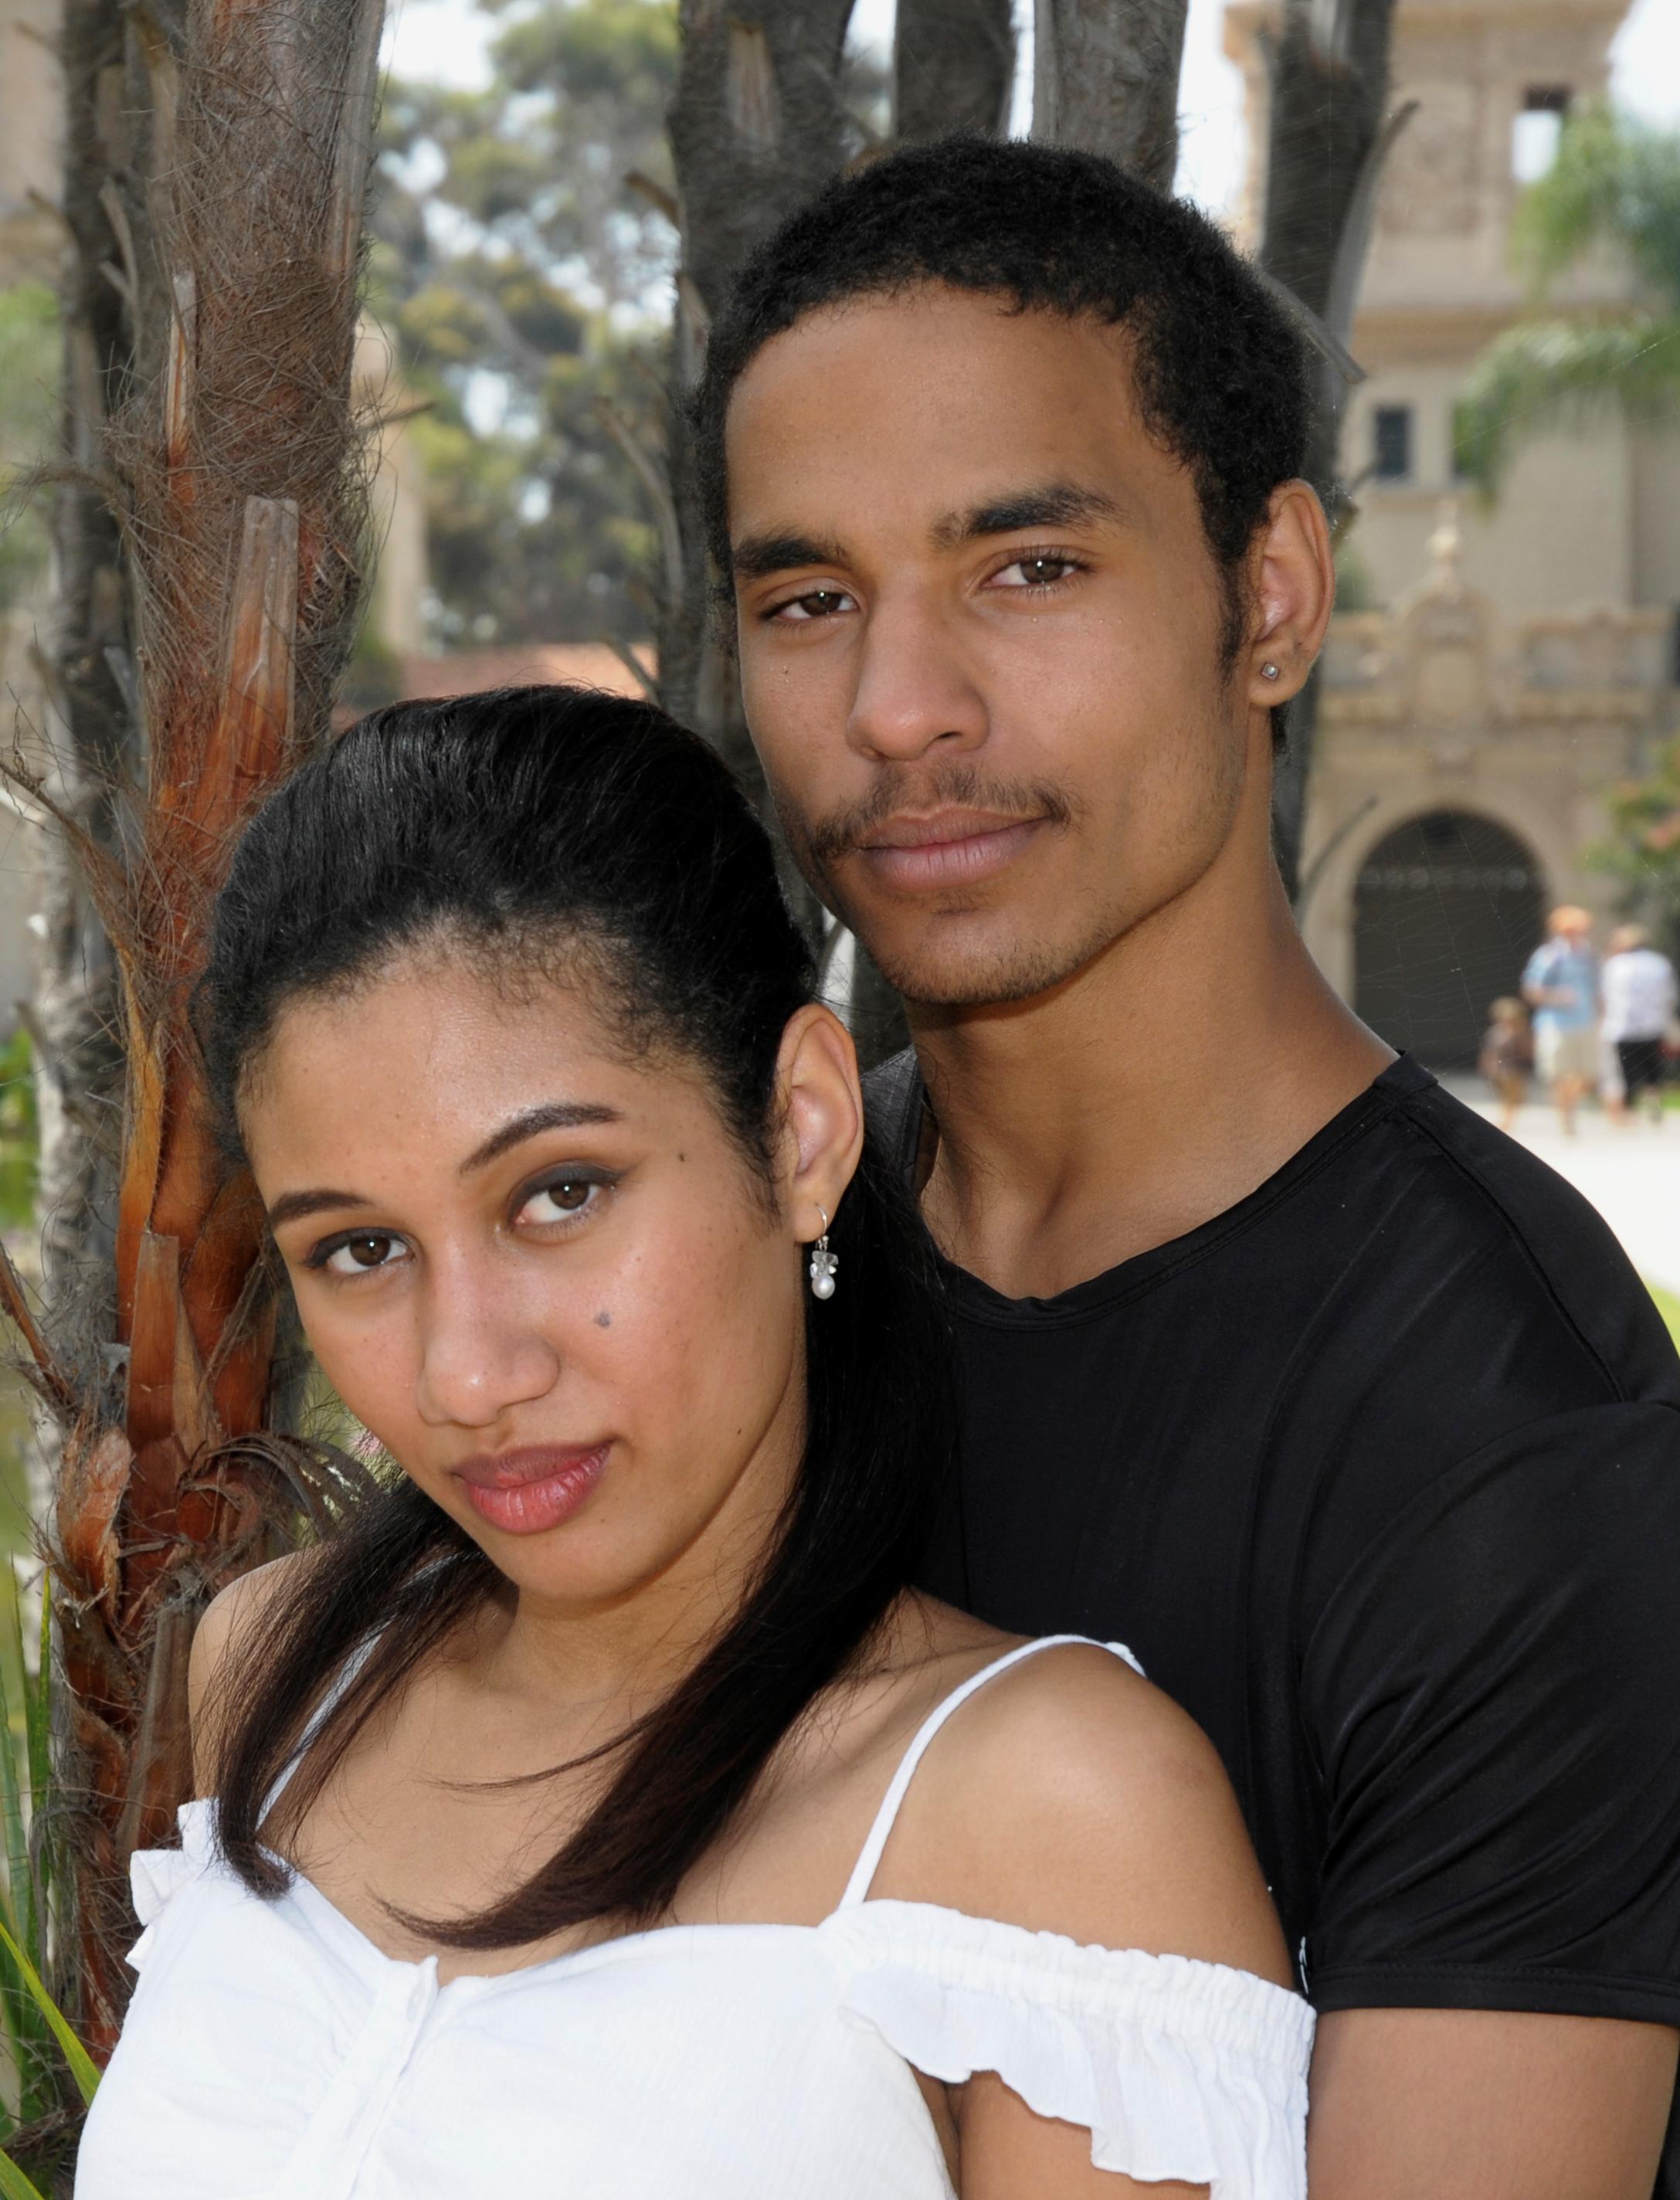 Kassy and Justin, Balboa Park, August 2009